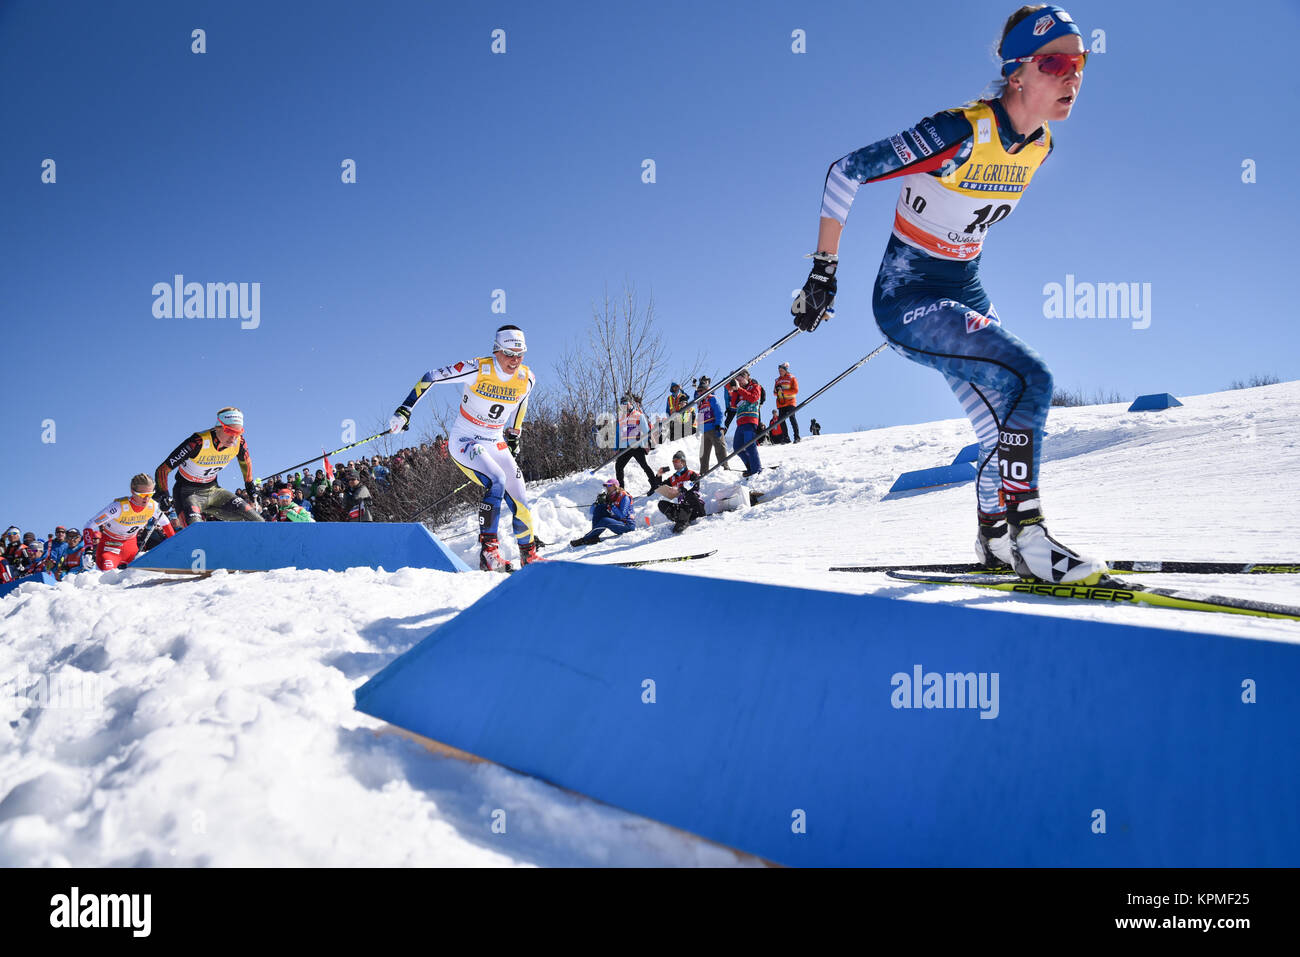 USA's Sadie Bjornsen (front) skiing in the Nordic ski WORLD CUP FINALS, Quebec, Quebec, Canada, 10K Classic; Next is Charlotte Kalla, Sweden. Stock Photo